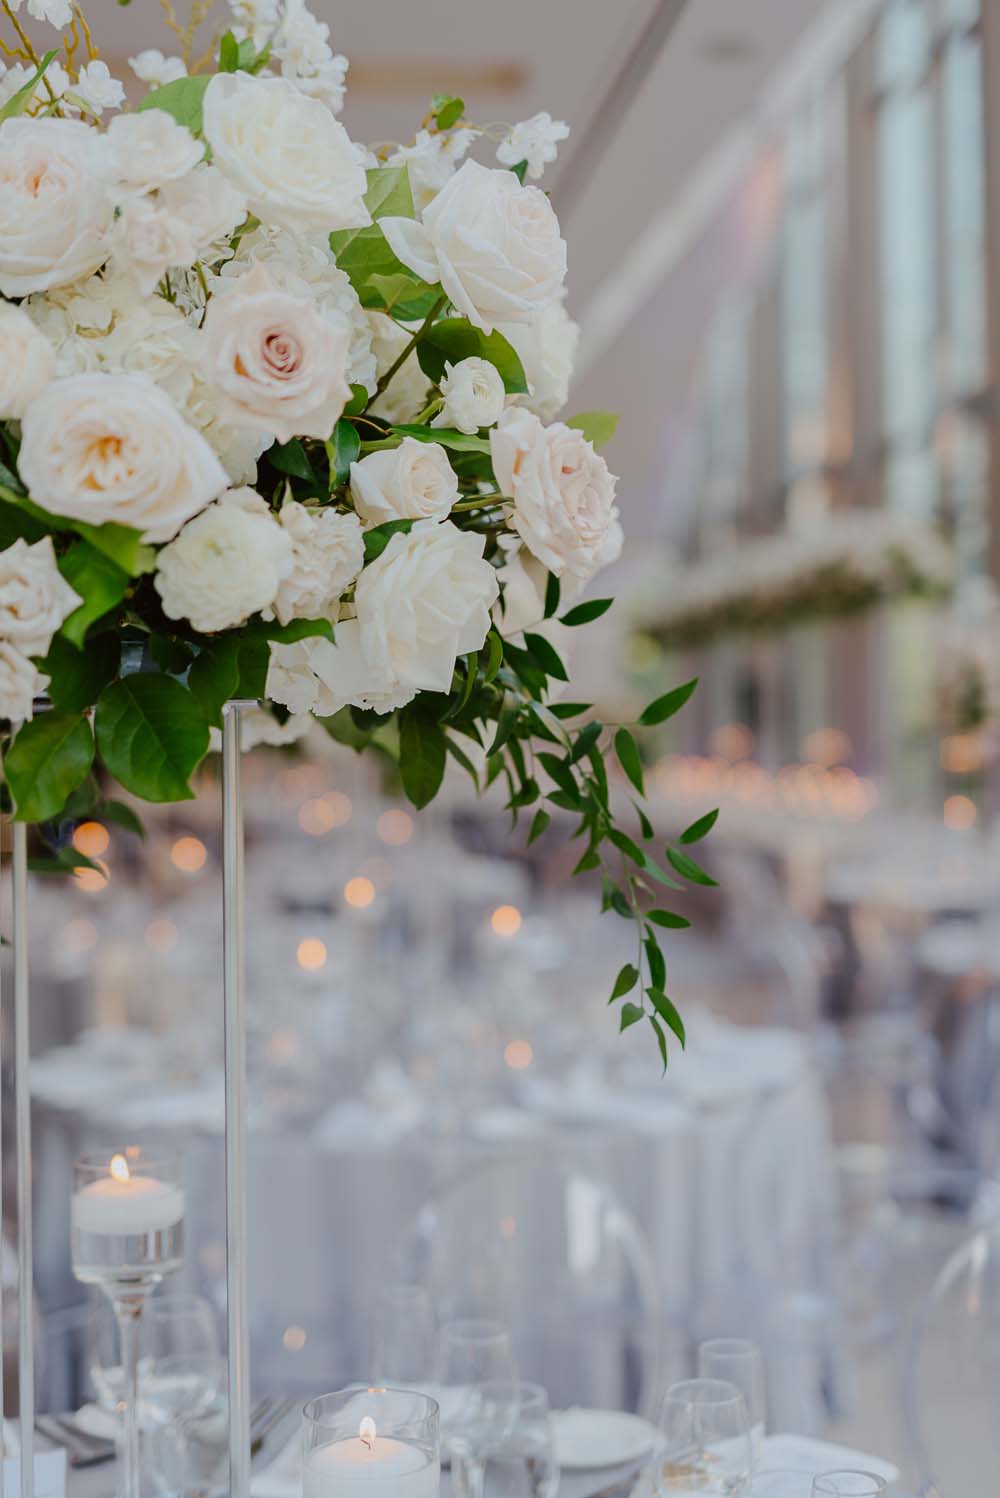 An Opulent Wedding At The Royal Conservatory Of Music - flowers